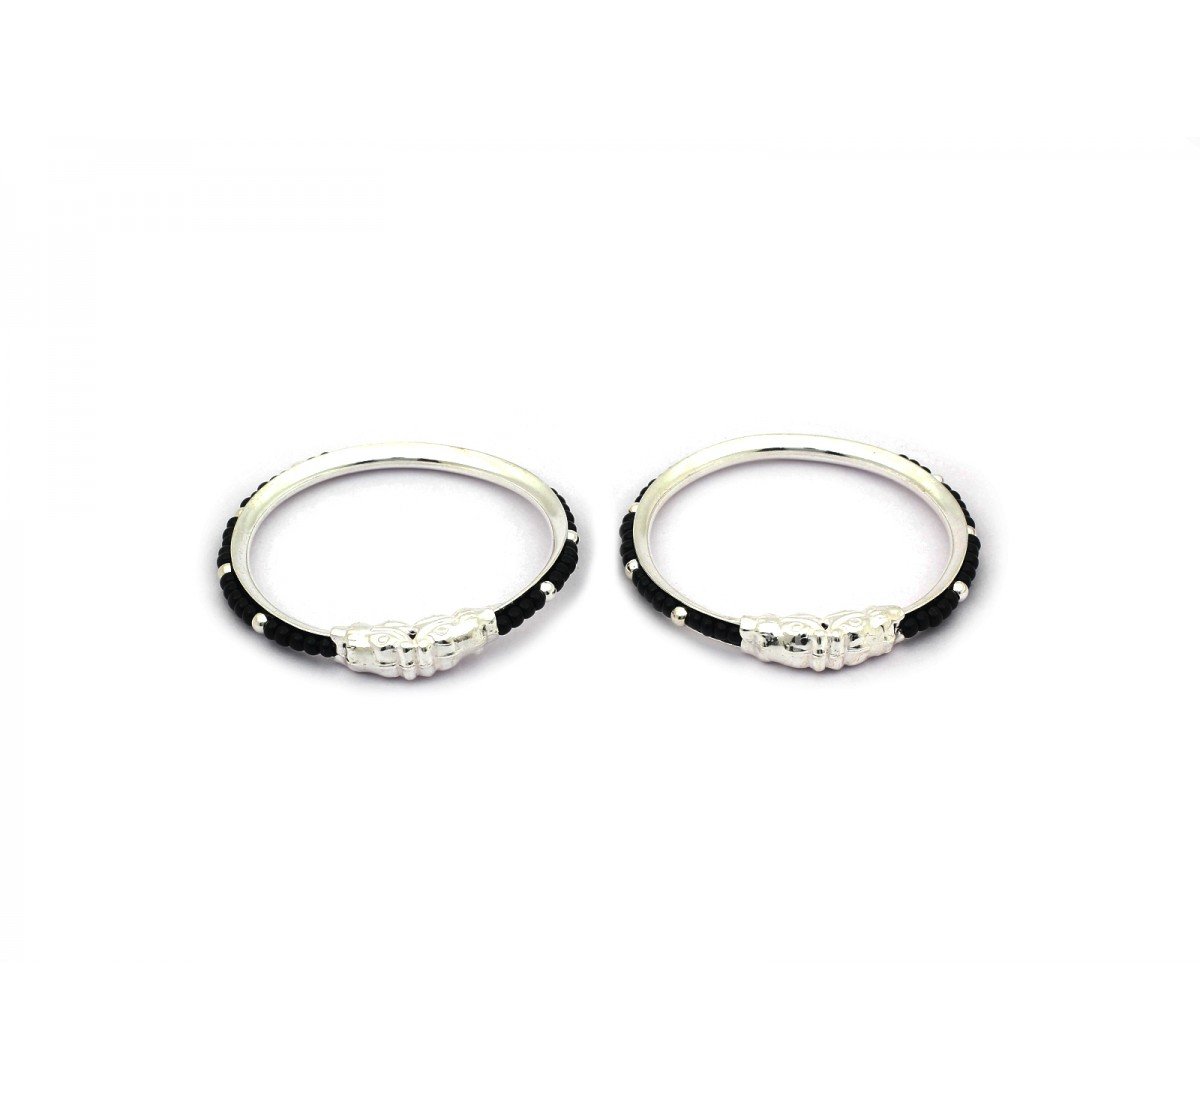 2 Inch Silver Kids Bangles at Rs 650/pair in New Delhi | ID: 26182904755